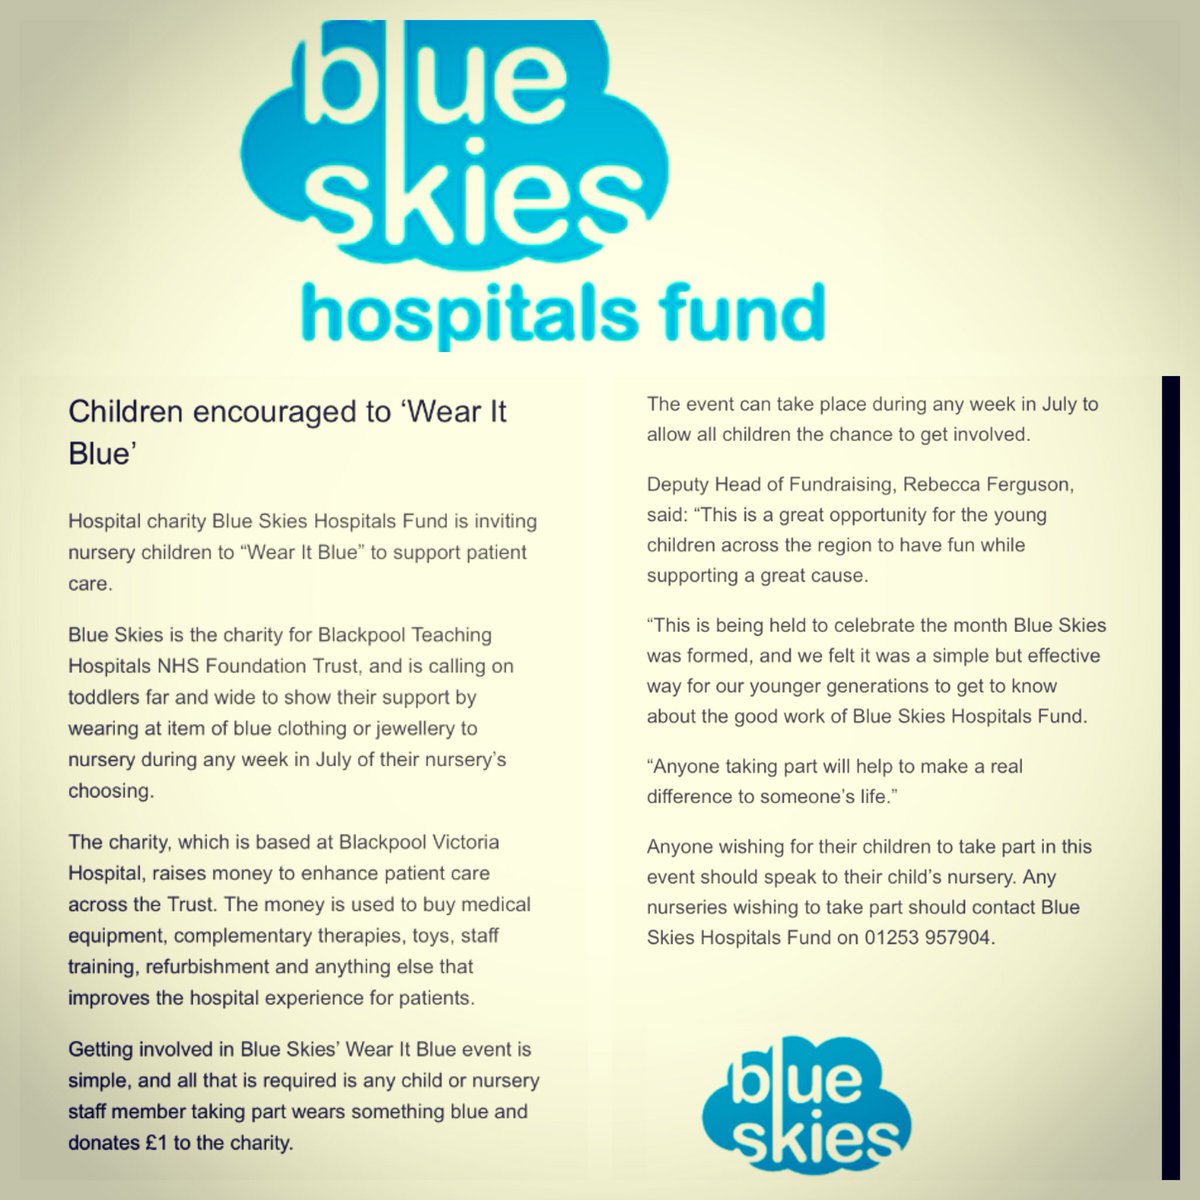 calling all nurseries 🙌🏻 please get in touch with @BlueSkiesFund if U want2 B involved in the #wearitblue 💙🏥💙🏥💙🏥💙🏥